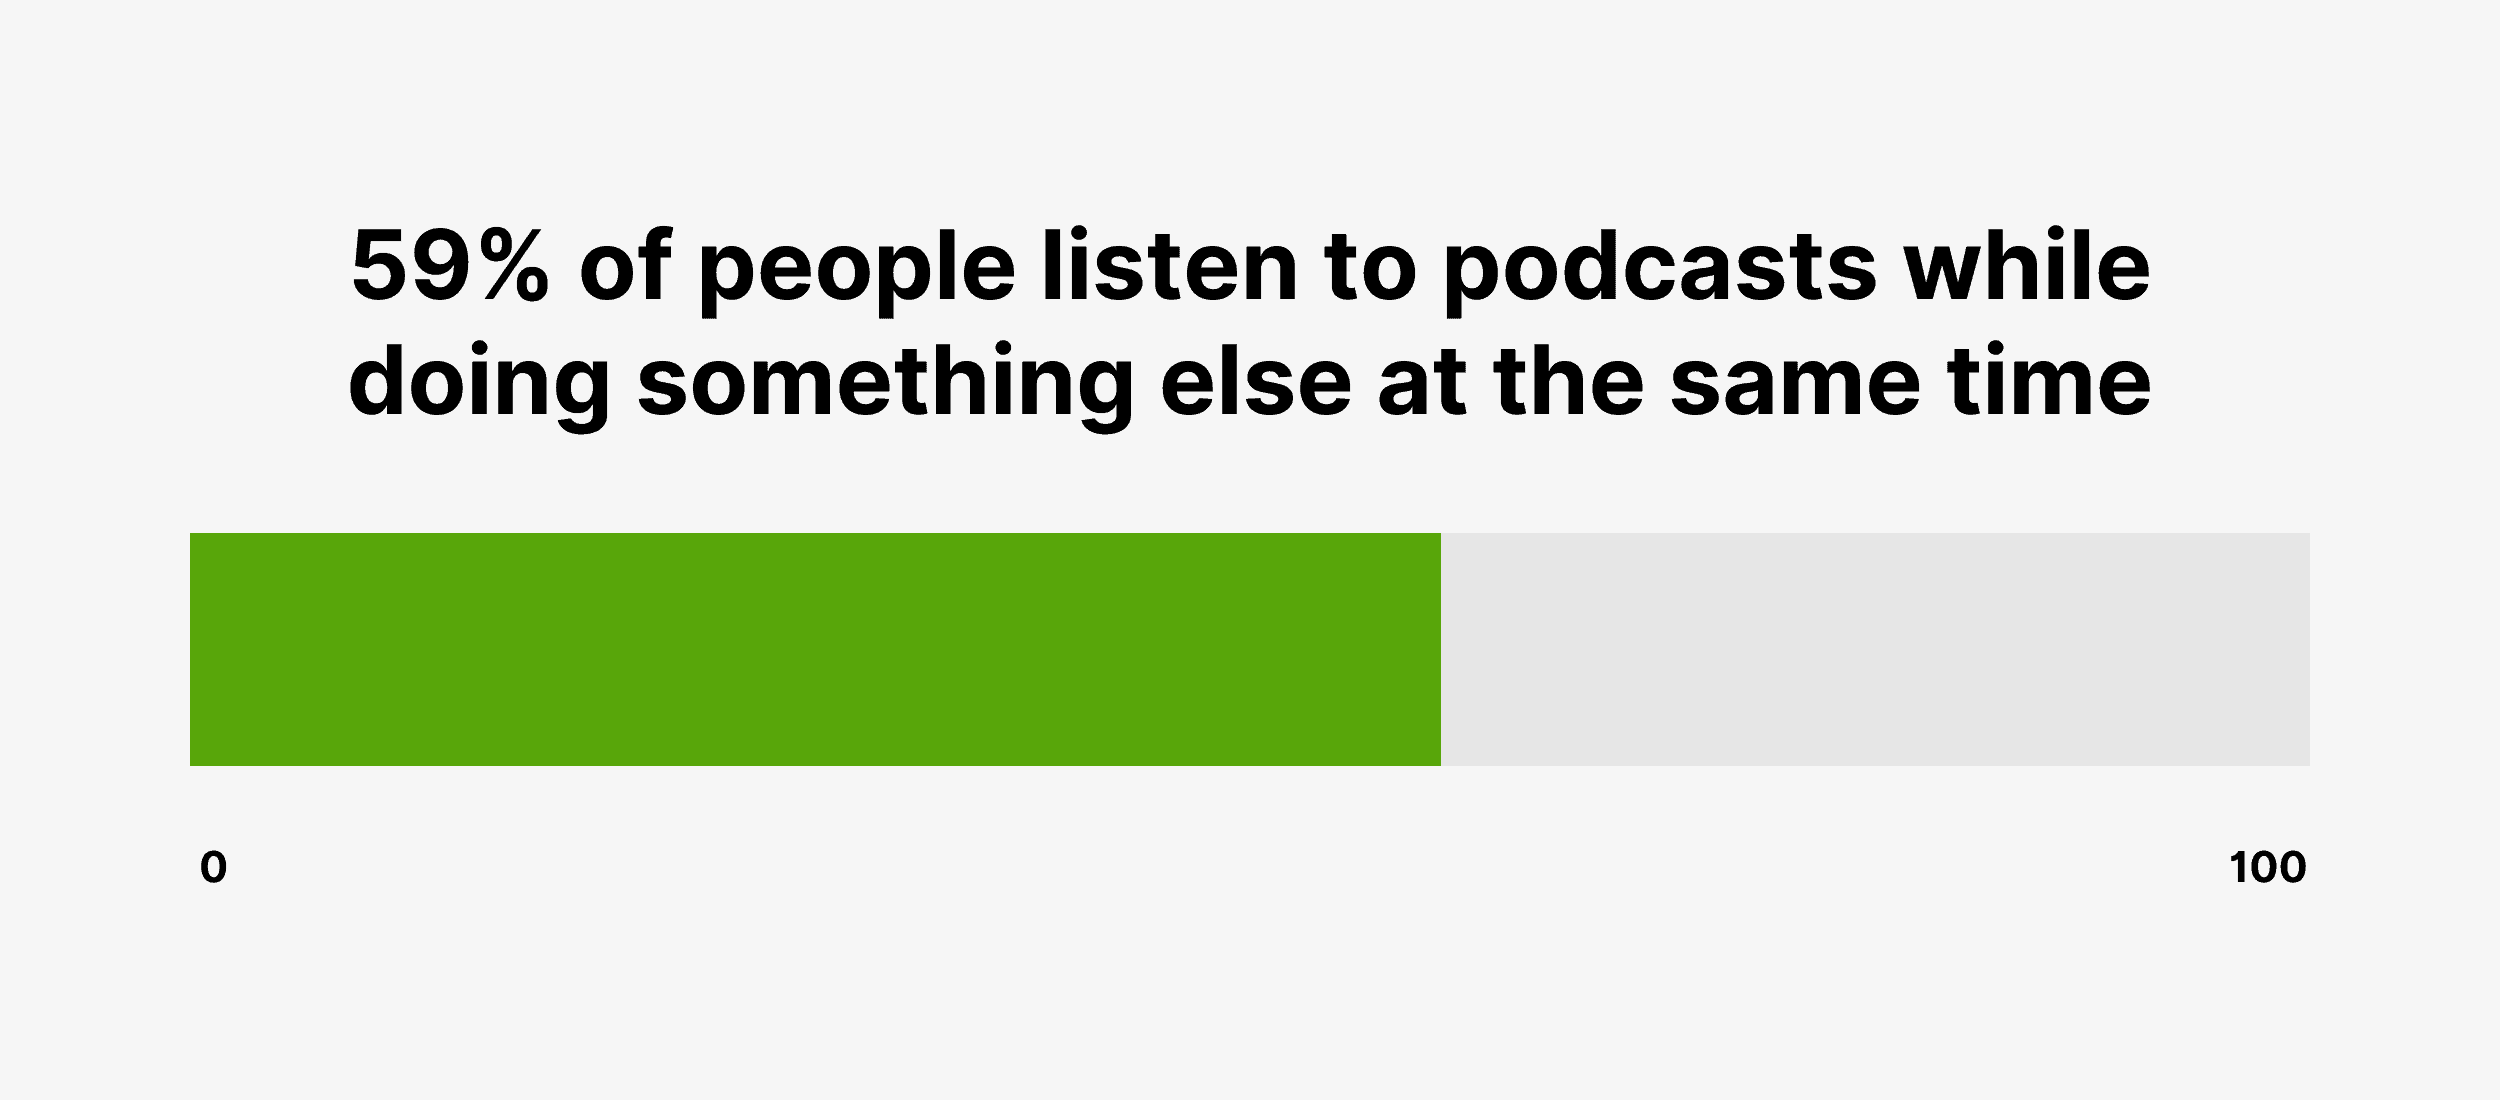 59% of people listen to podcasts while doing something else at the same time